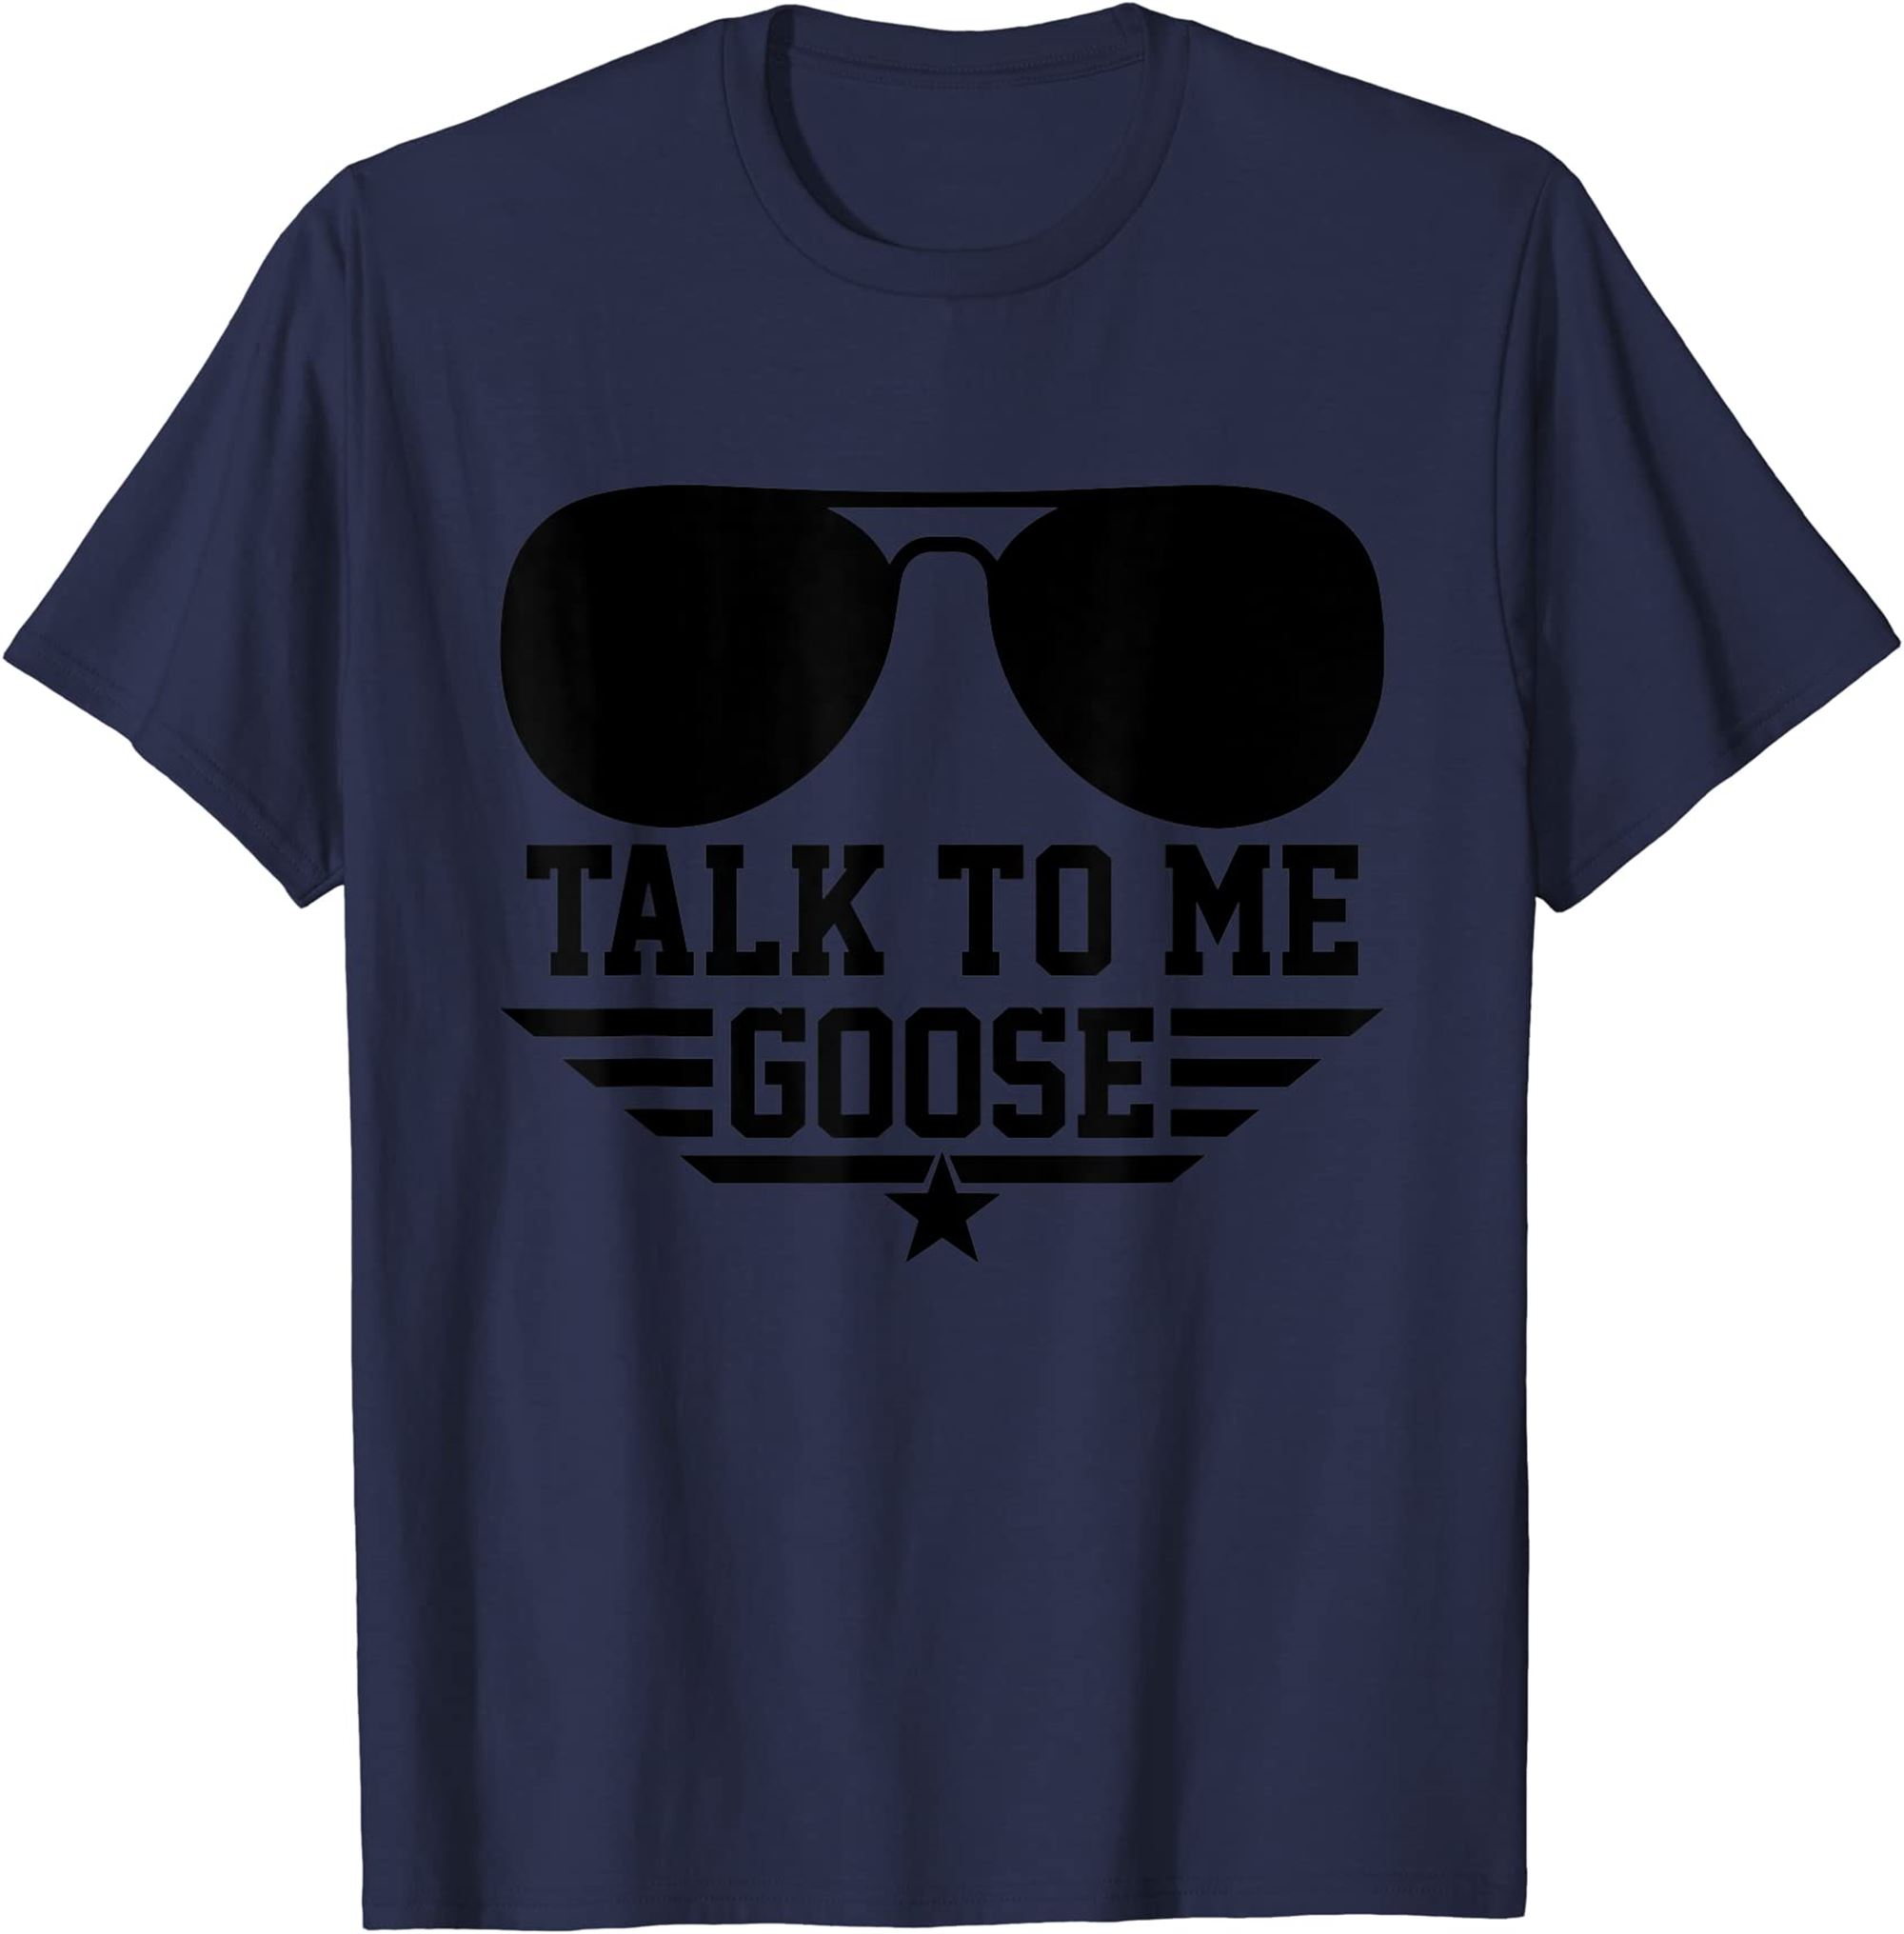 Funny Talk To Me Goose T-shirt Full Size Up To 5xl